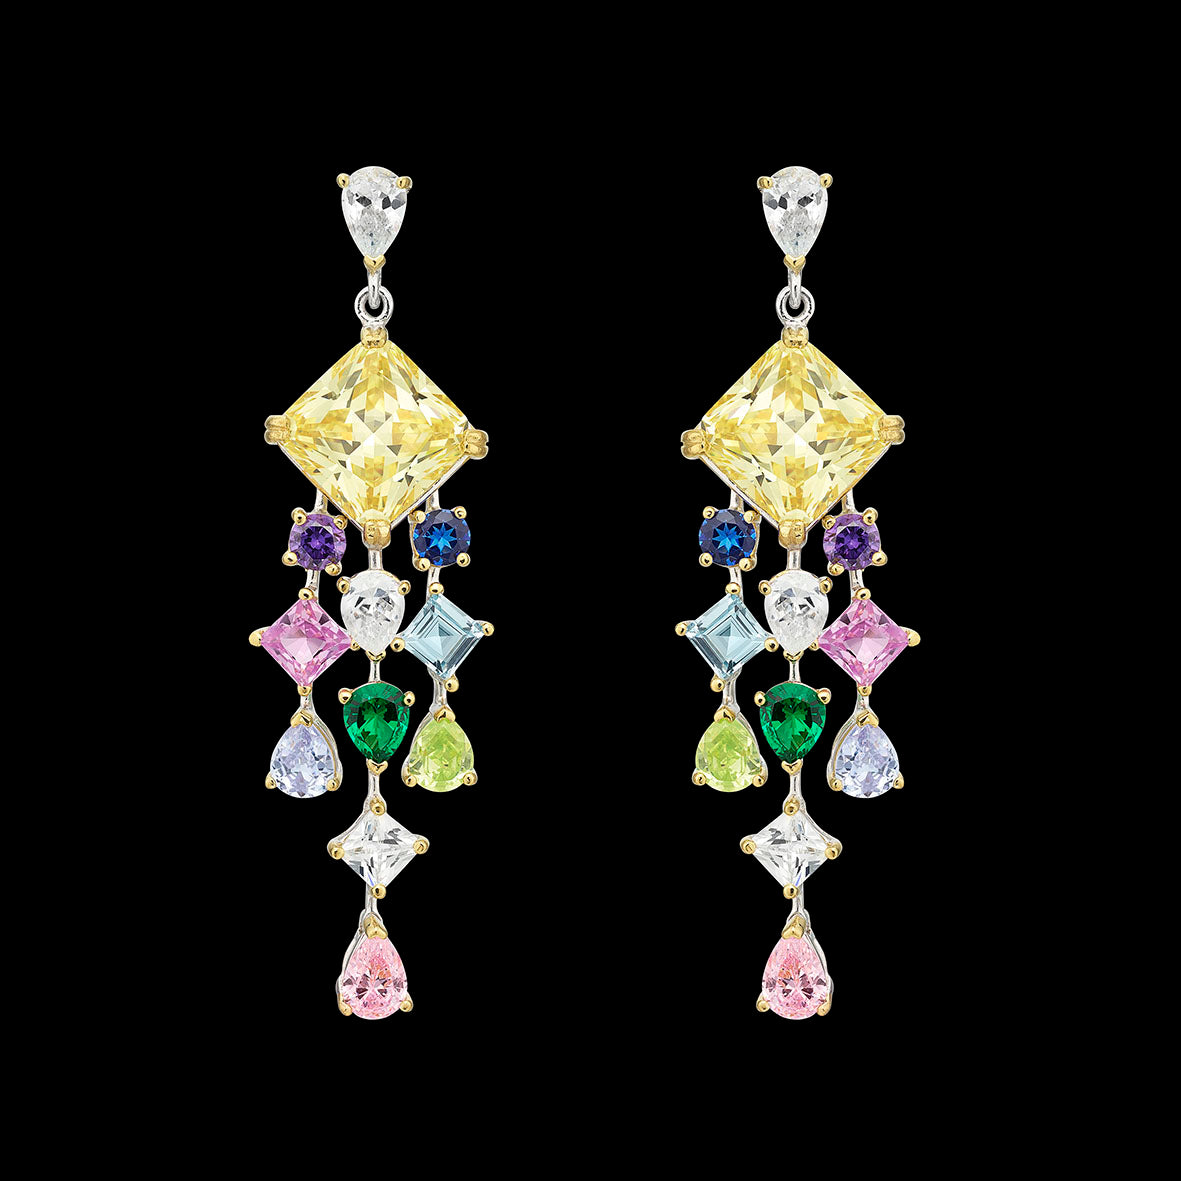 Rainbow Asscher Drop Earrings, Earring, Anabela Chan Joaillerie - Fine jewelry with laboratory grown and created gemstones hand-crafted in the United Kingdom. Anabela Chan Joaillerie is the first fine jewellery brand in the world to champion laboratory-grown and created gemstones with high jewellery design, artisanal craftsmanship and a focus on ethical and sustainable innovations.